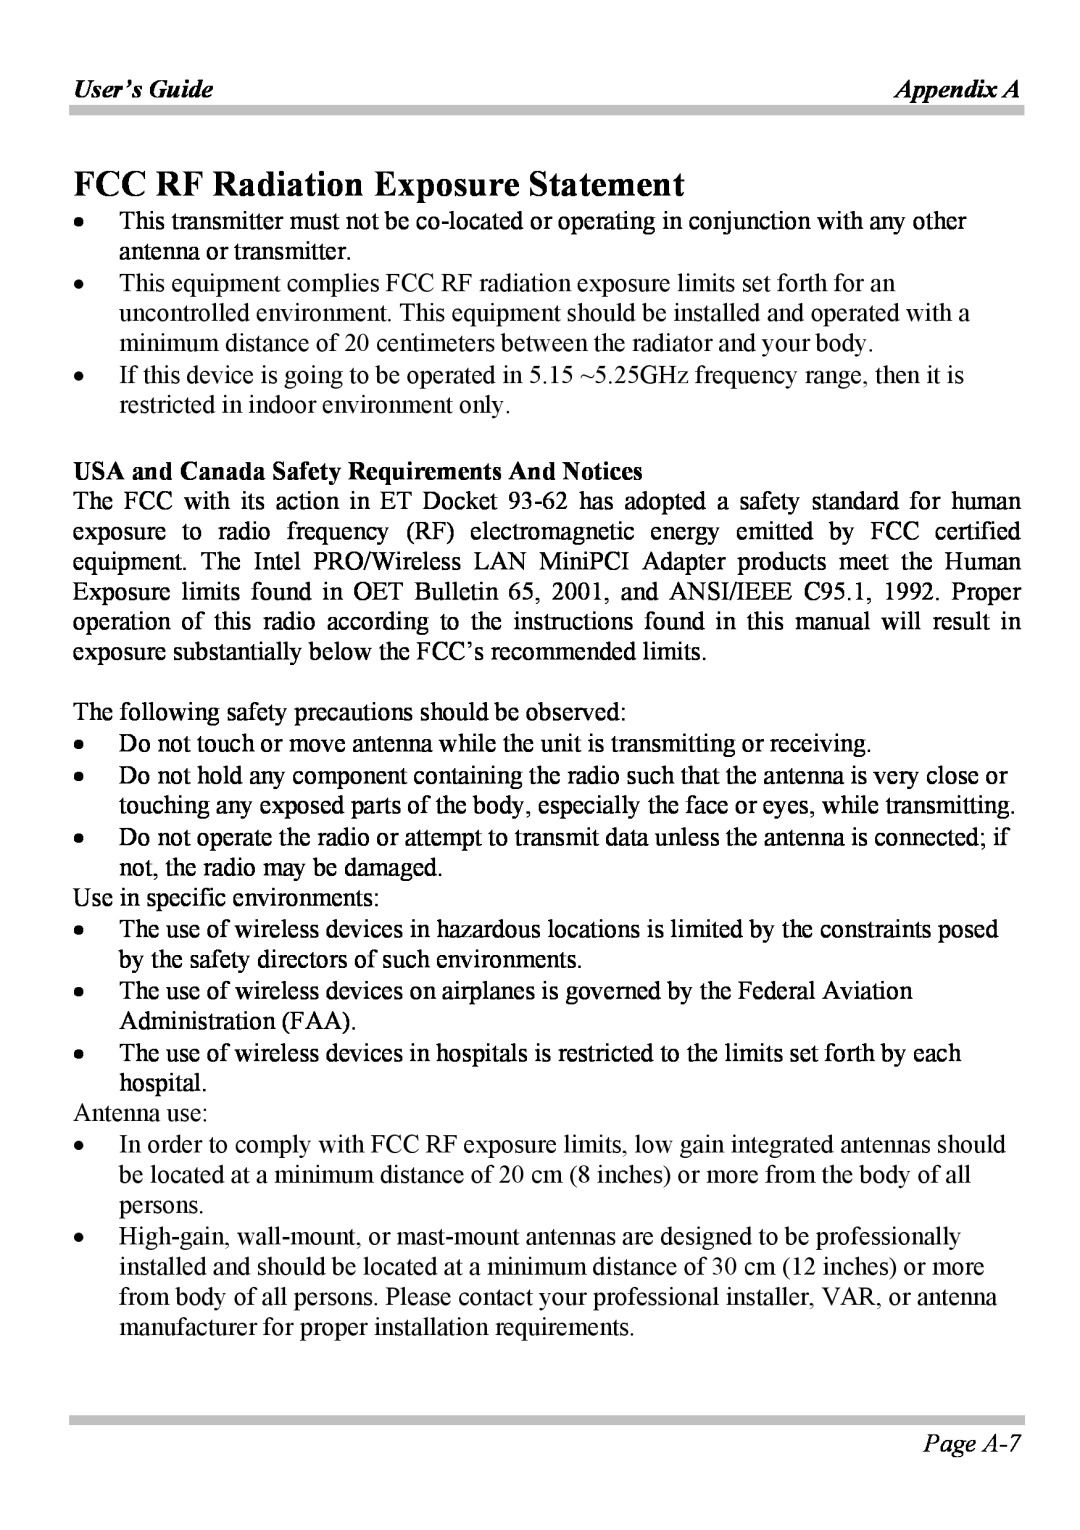 Microsoft W840DI FCC RF Radiation Exposure Statement, USA and Canada Safety Requirements And Notices, Page A-7, Appendix A 